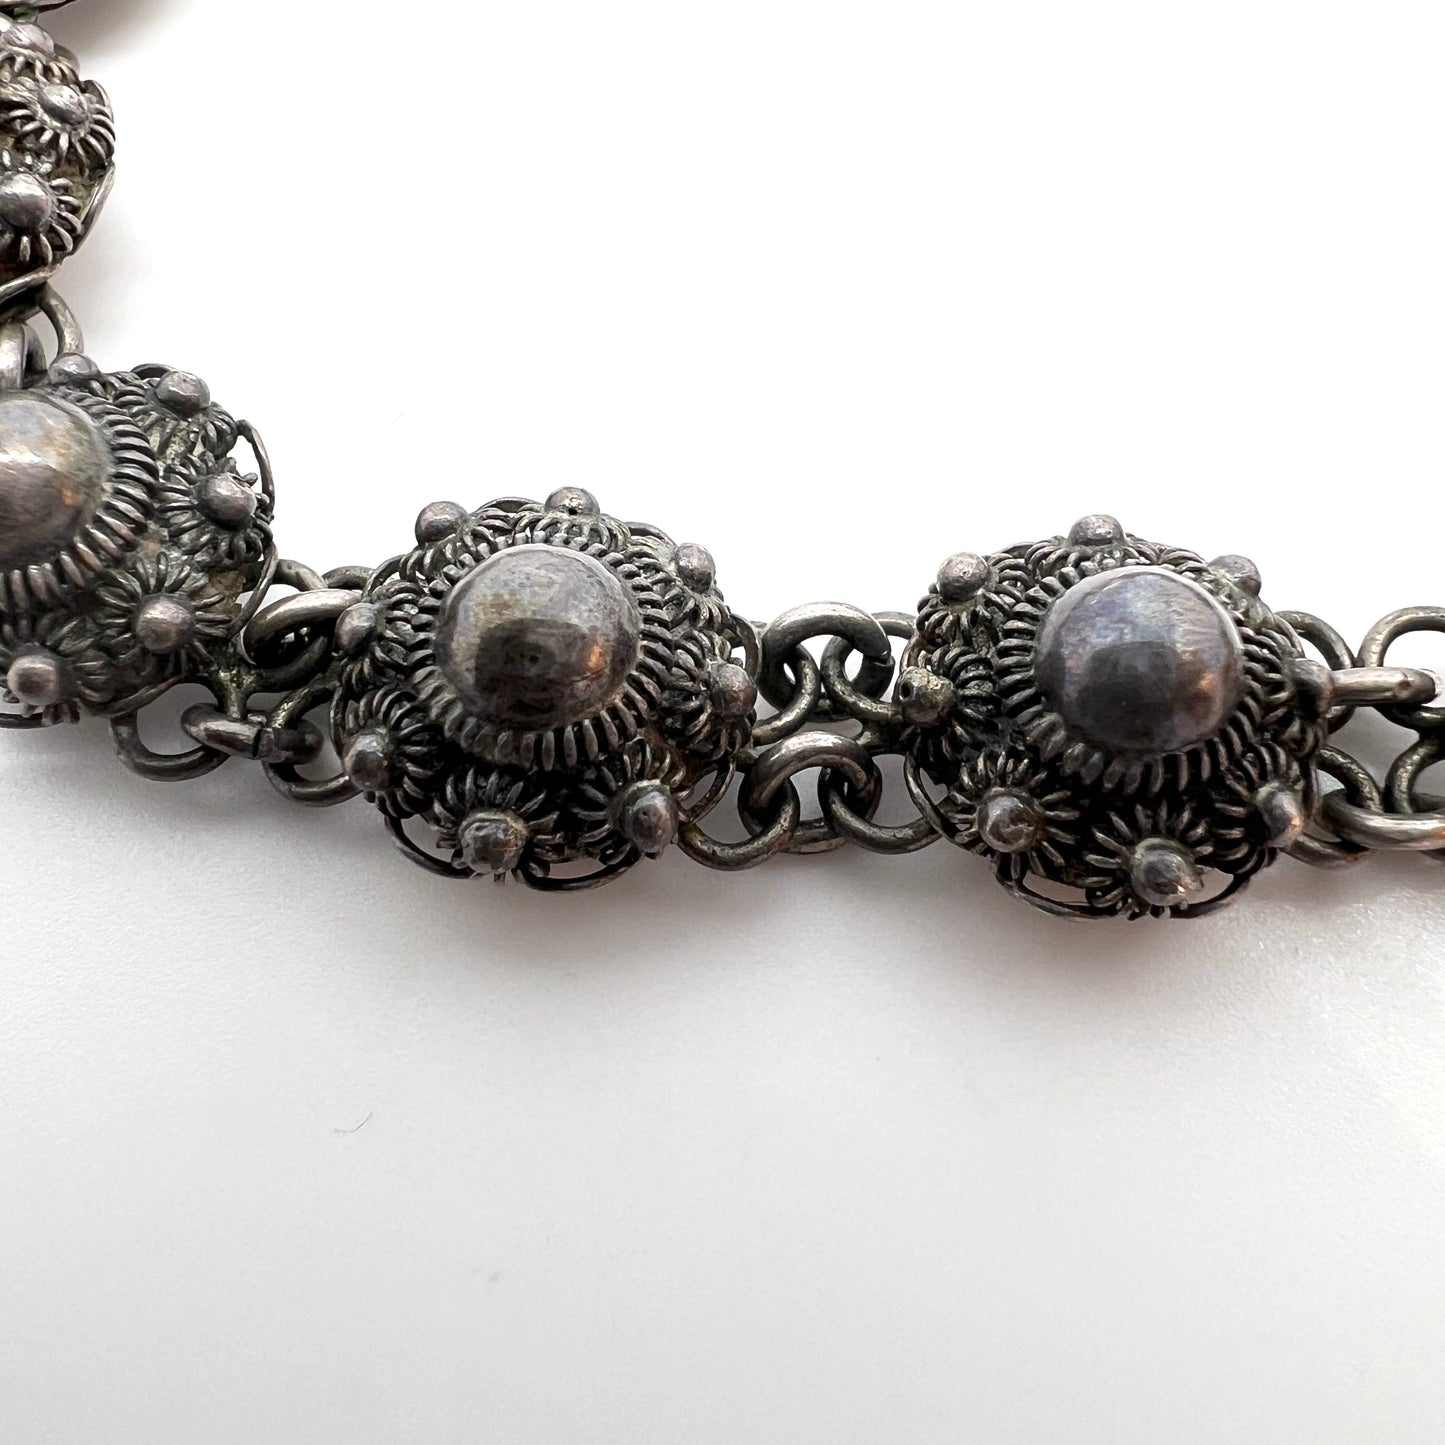 The Netherlands early to mid 1900s. Solid Silver Enamel Charm Bracelet.